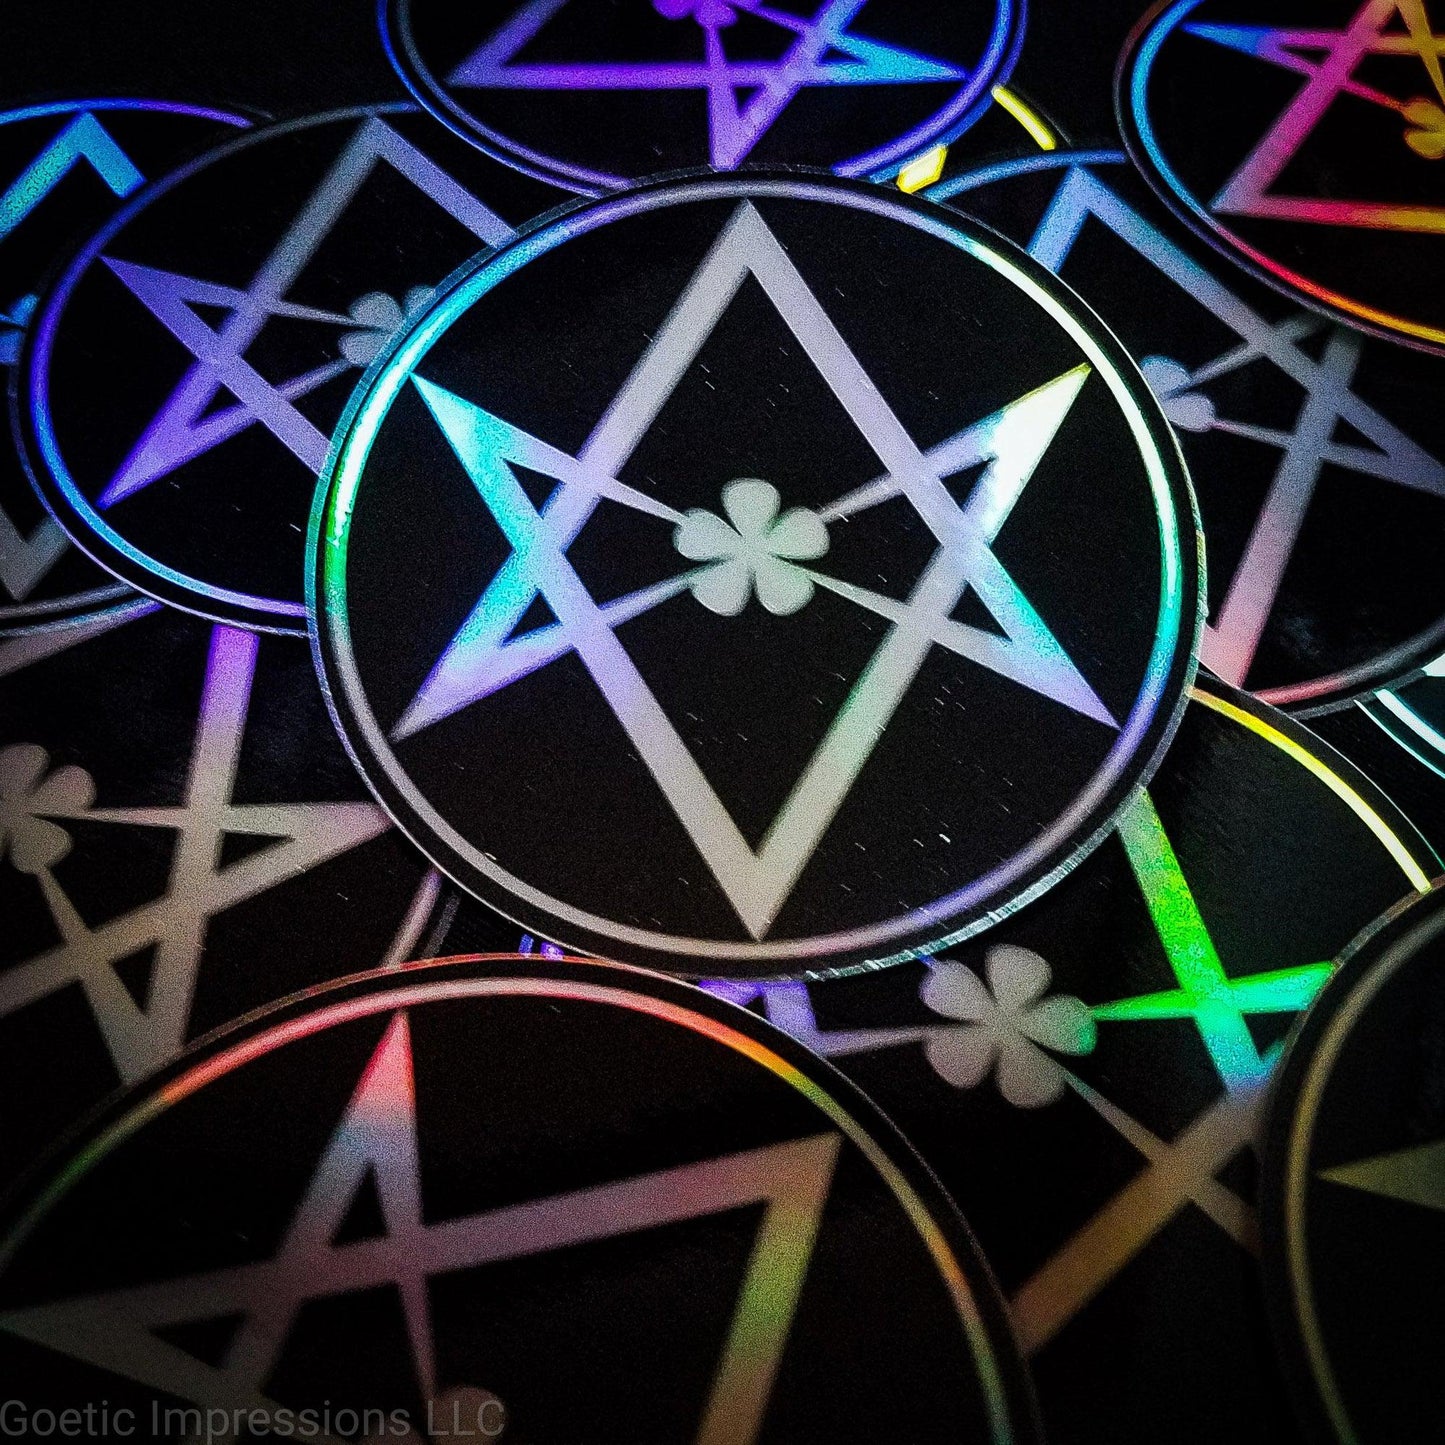 A pile of holographic stickers featuring a black and white sticker of the Unicursal Hexagram. The sticker is circular 